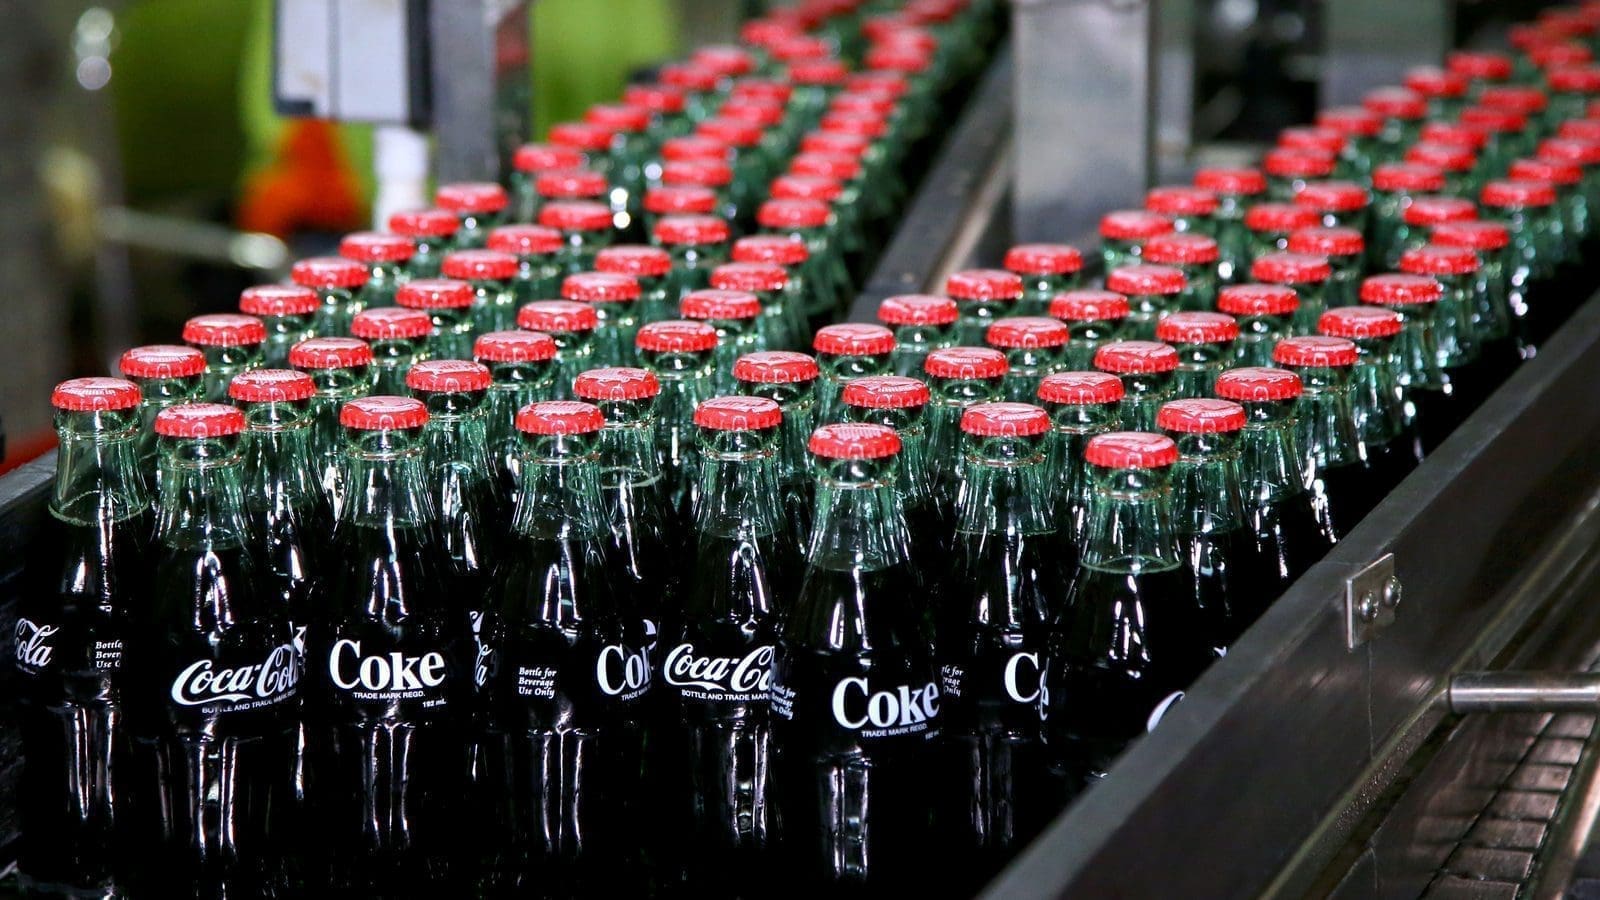 Coca-Cola hits 10% sales growth in Q3 results, plans to continue increased marketing spend